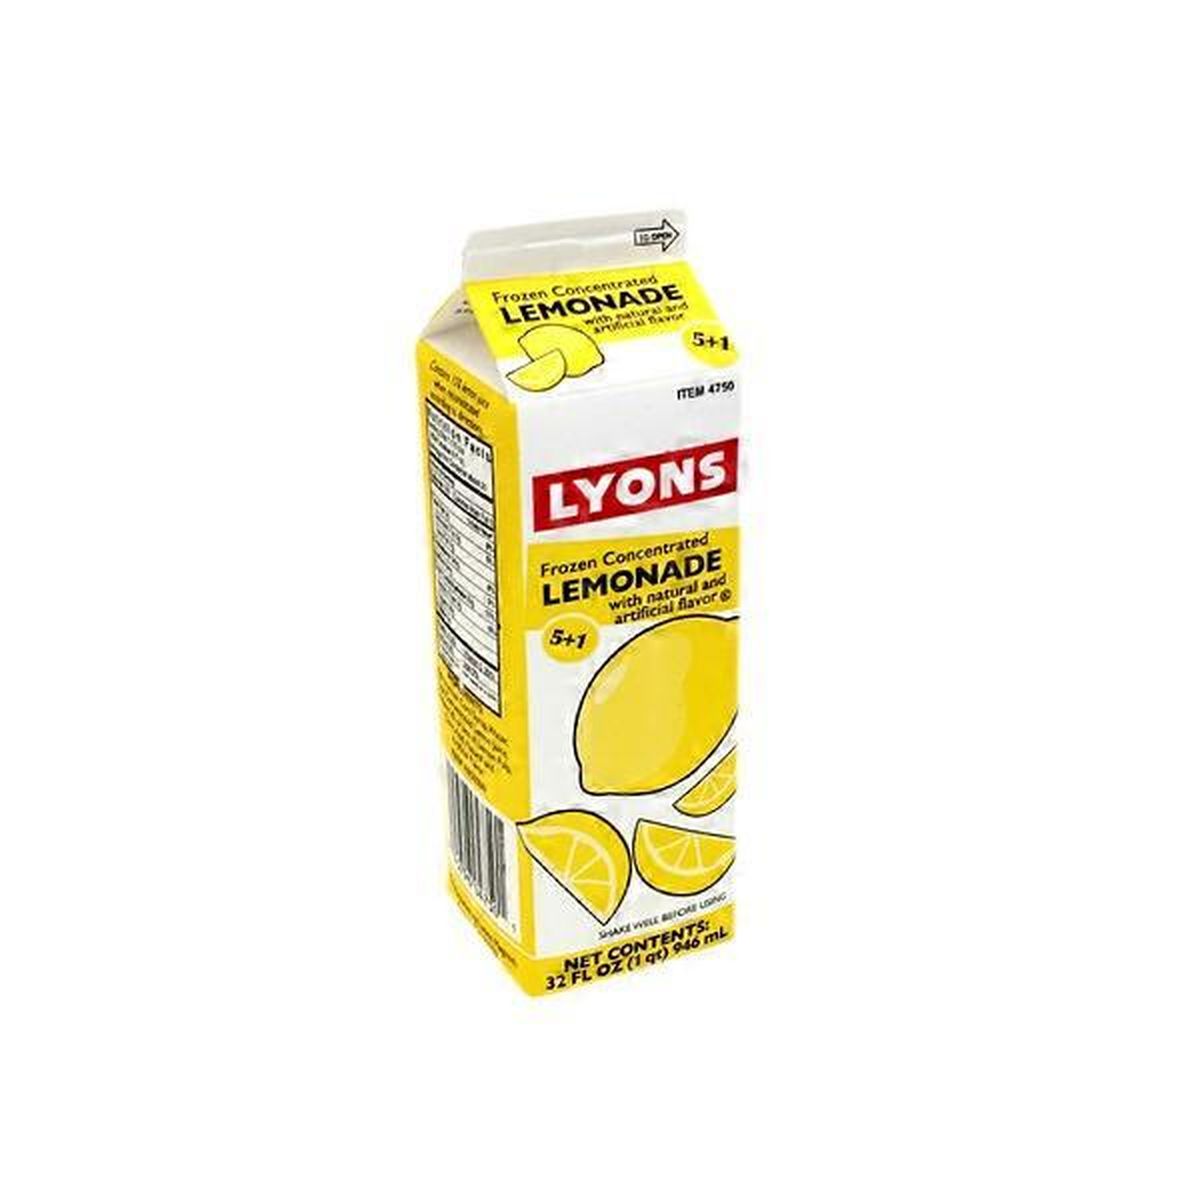 Lyons Frozen Concentrated Lemonade 5 1 32 Fl Oz Delivery Or Pickup